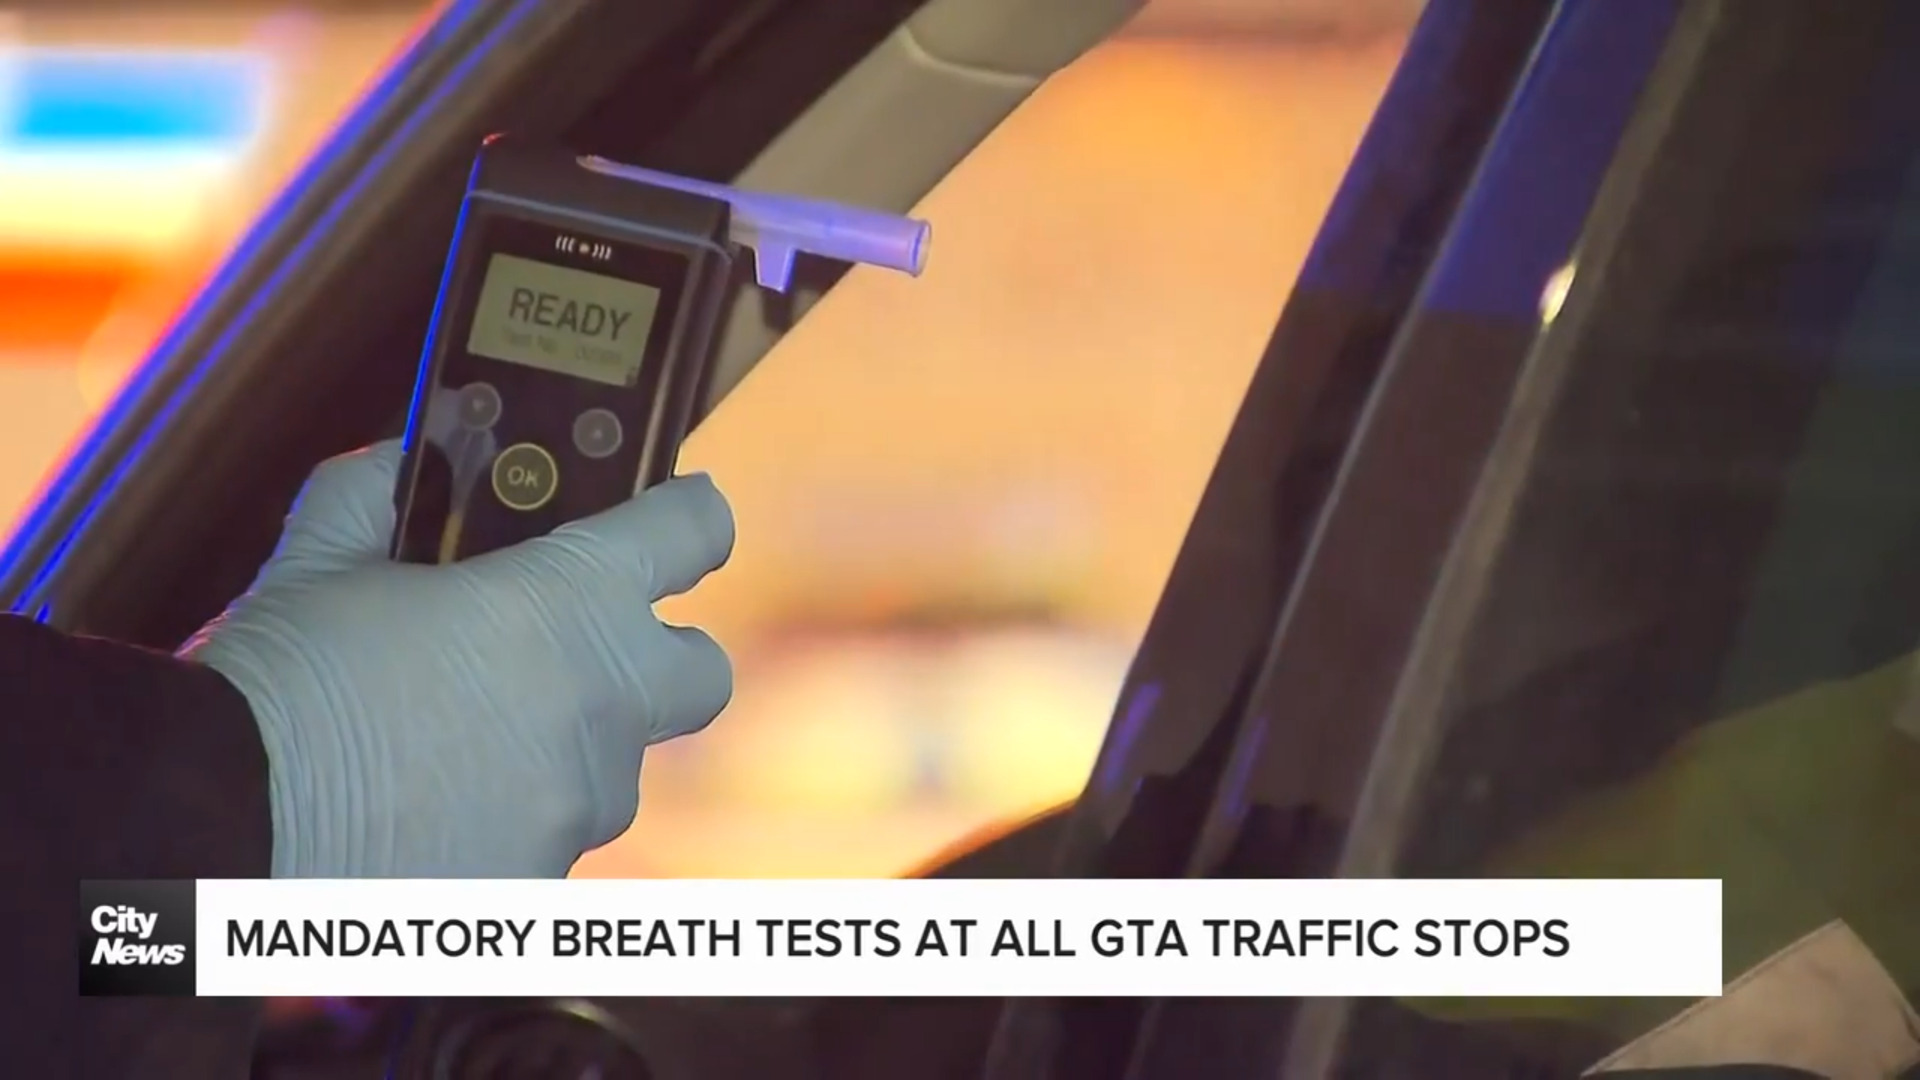 Breath test now required at all OPP traffic stops in GTA